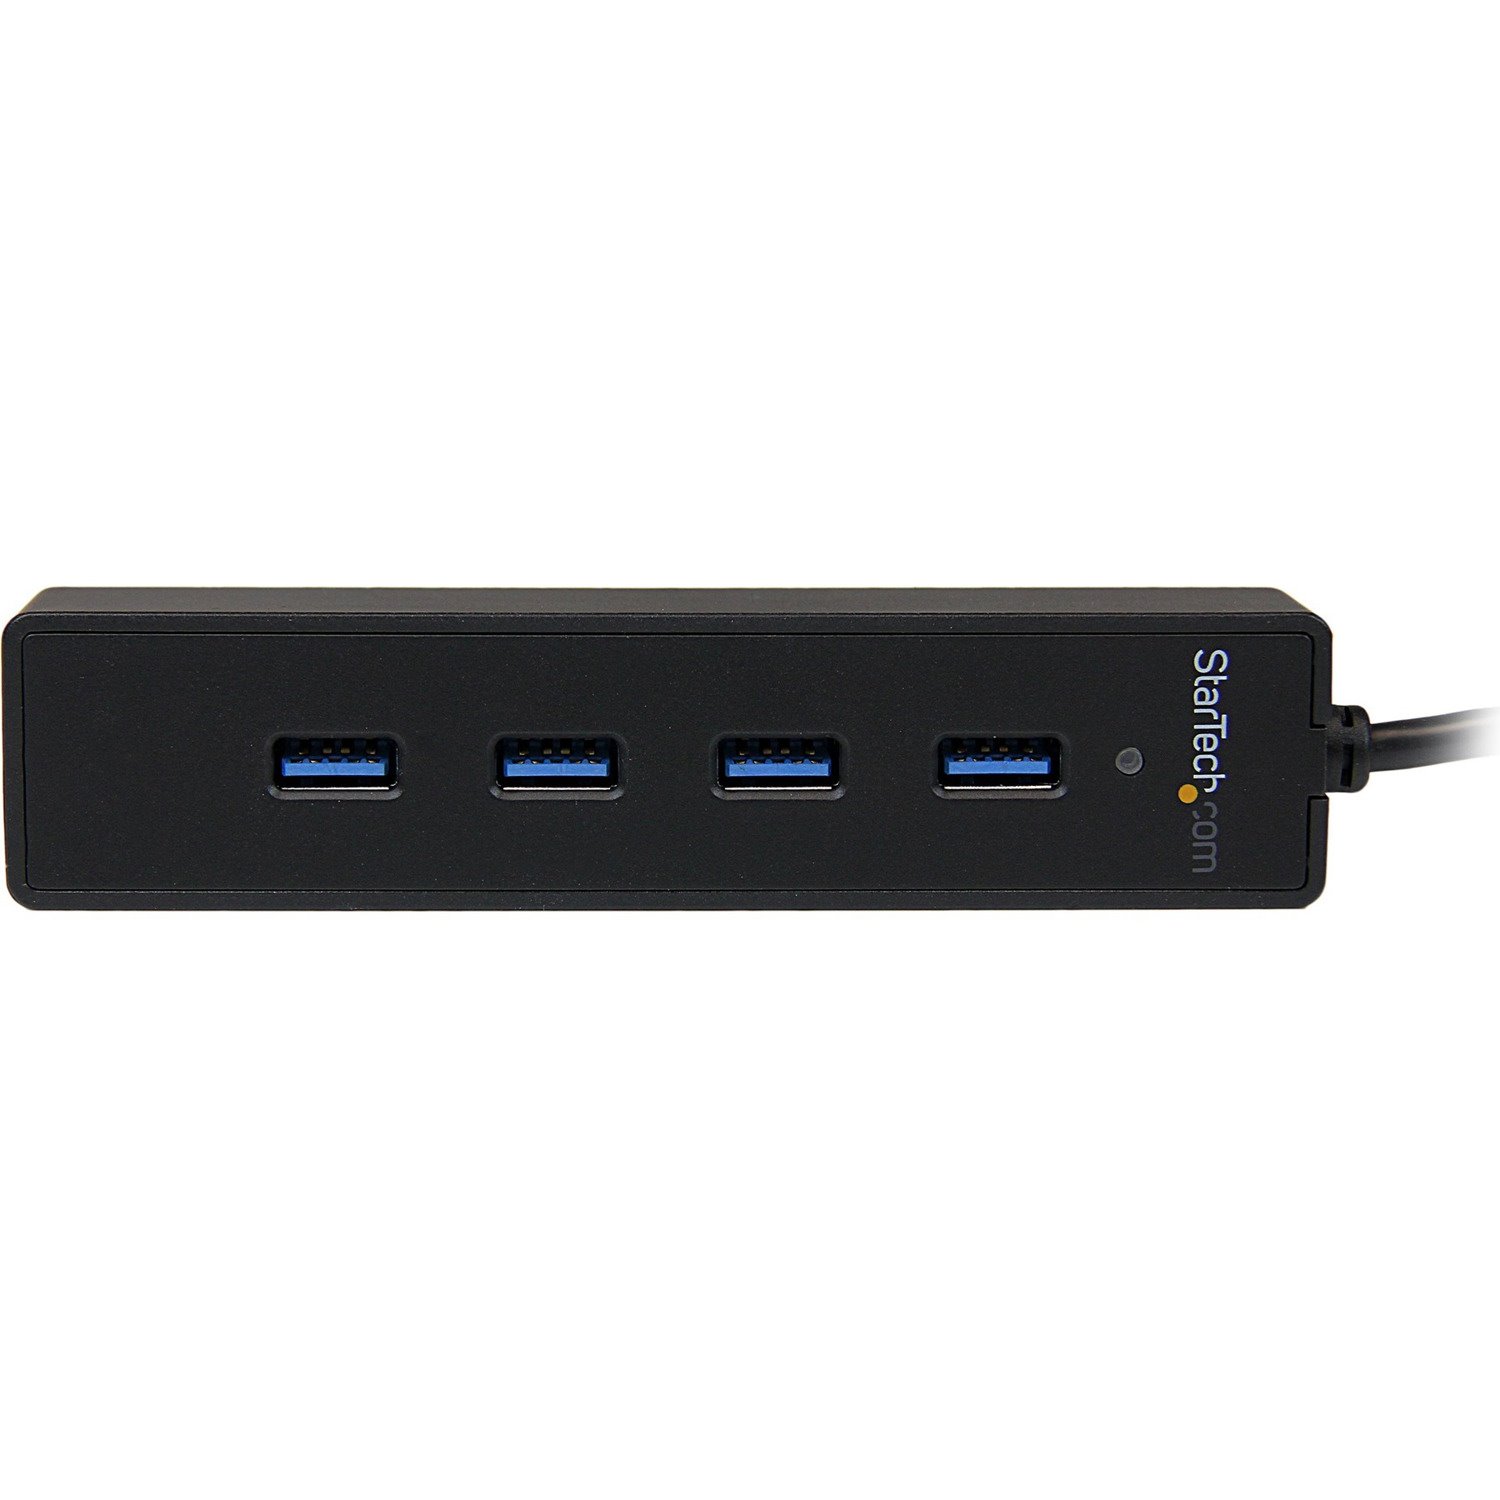 StarTech.com 4 Port Portable SuperSpeed USB 3.0 Hub with Built-in Cable - 5Gbps